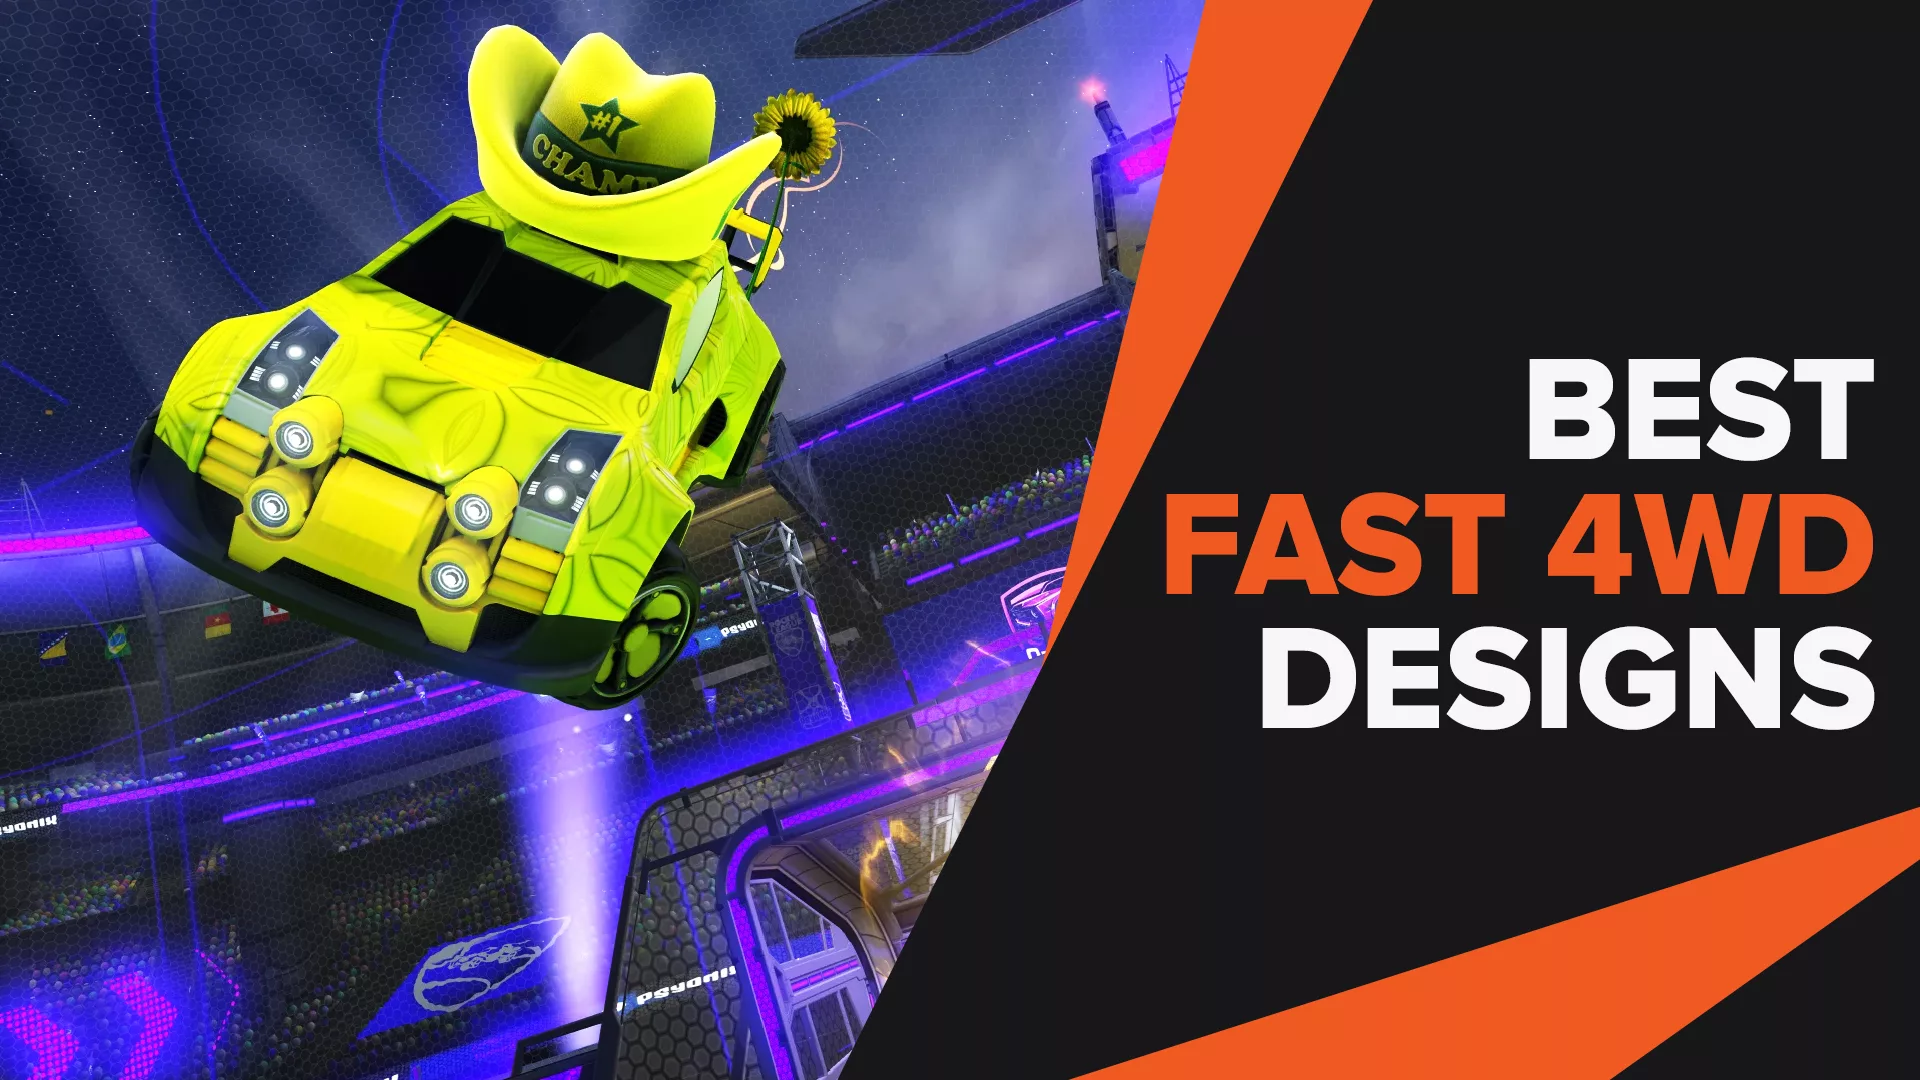 The Best Fast 4WD Designs You will Love in Rocket League